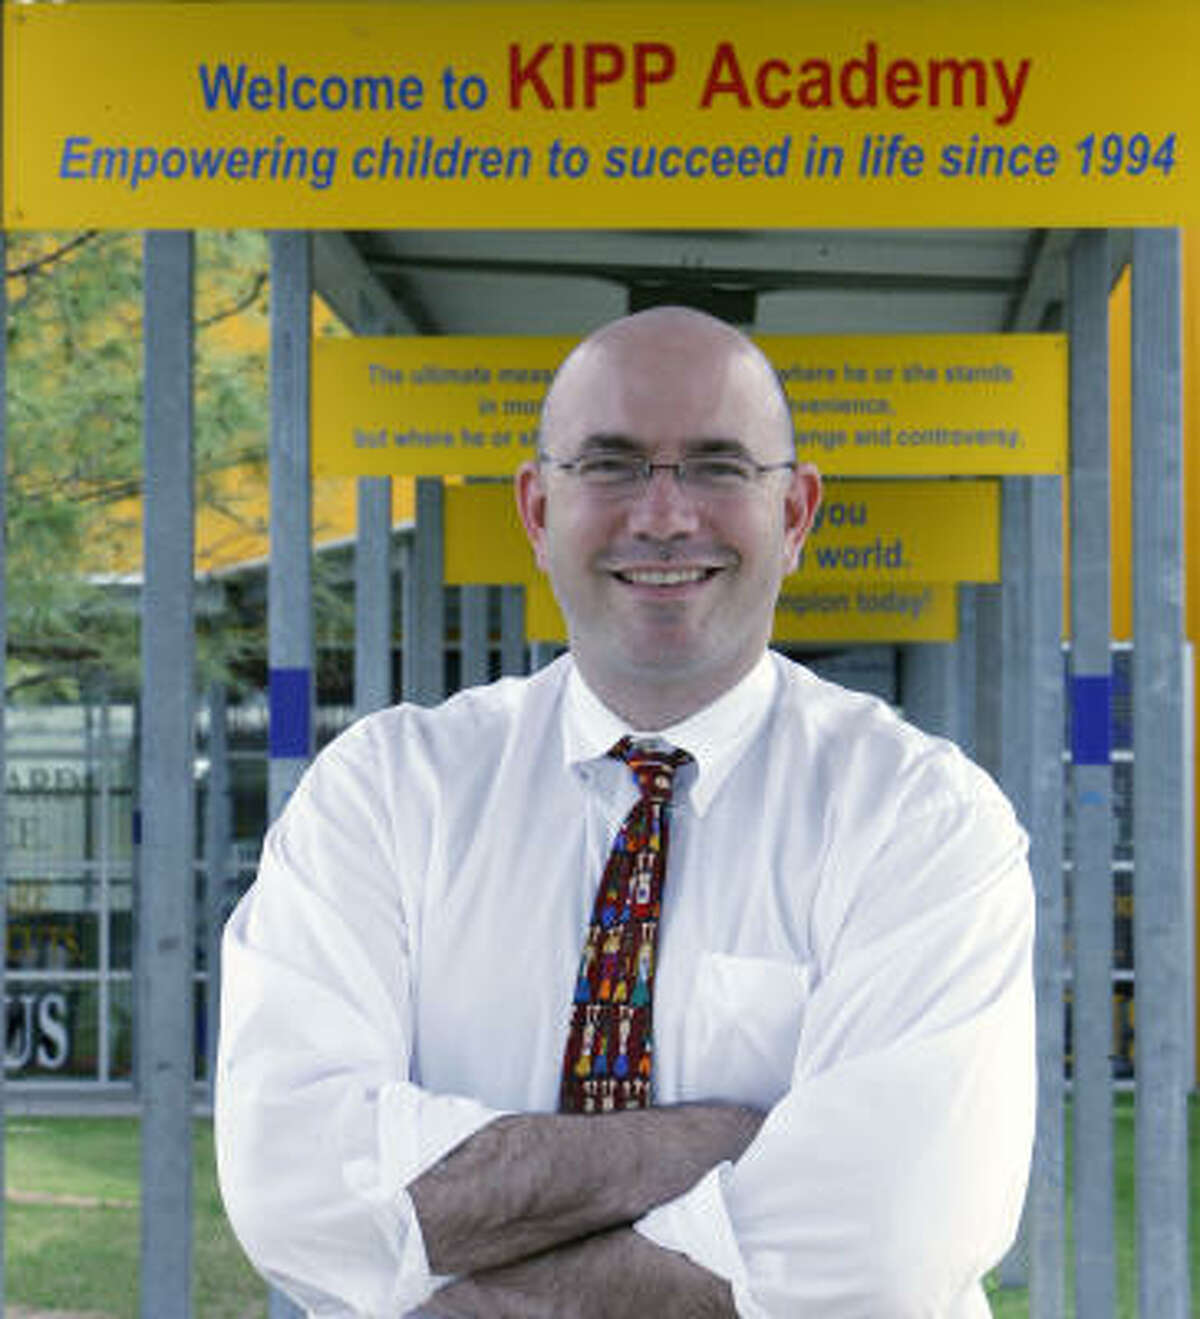 Mike Feinberg, co-founder of KIPP, is introducing a community-based school model in southwest Houston.